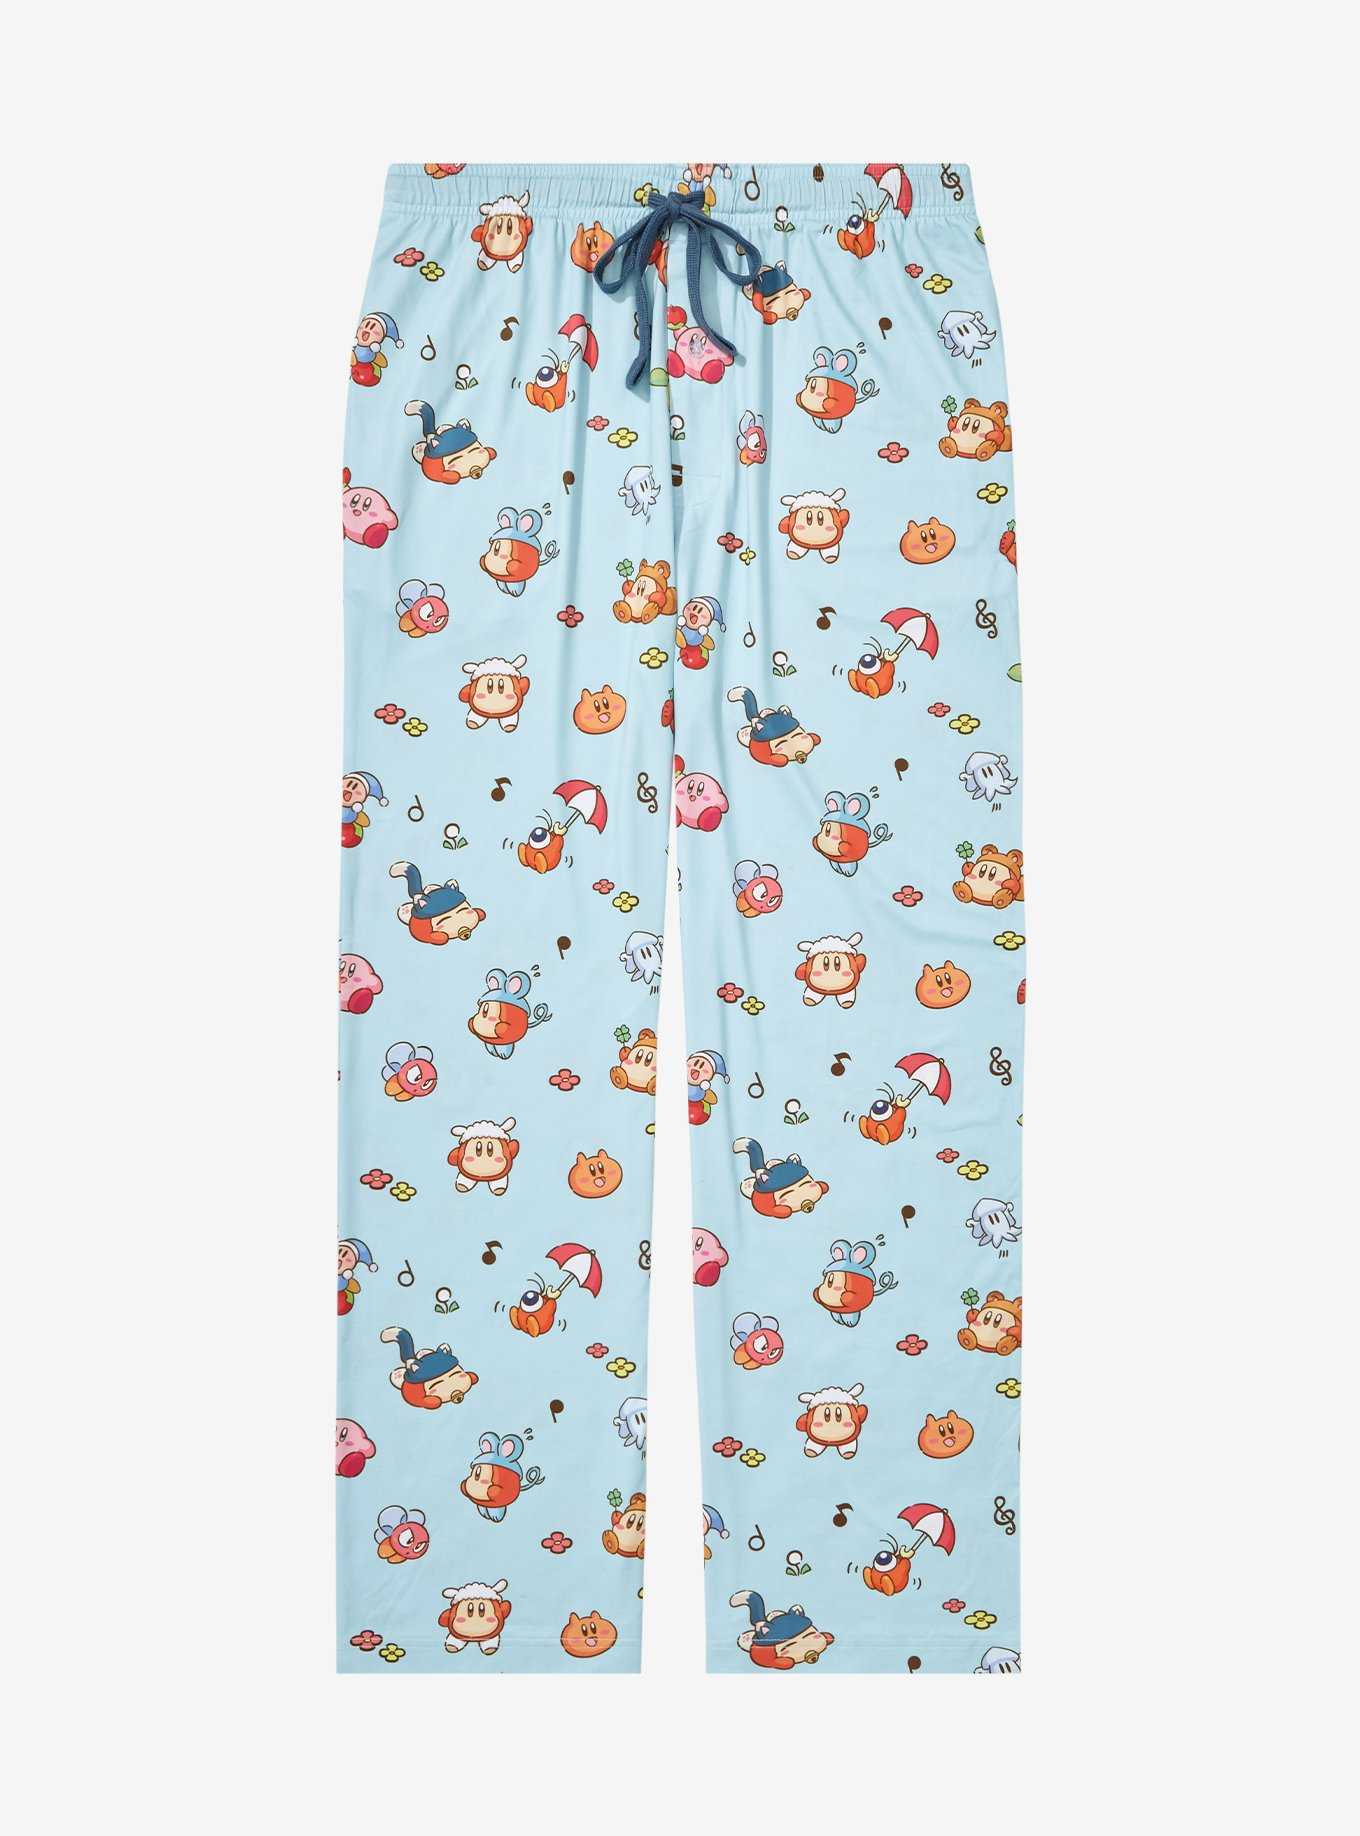 Nintendo Kirby & Waddle Dee Outfits Allover Print Sleep Pants - BoxLunch Exclusive, , hi-res